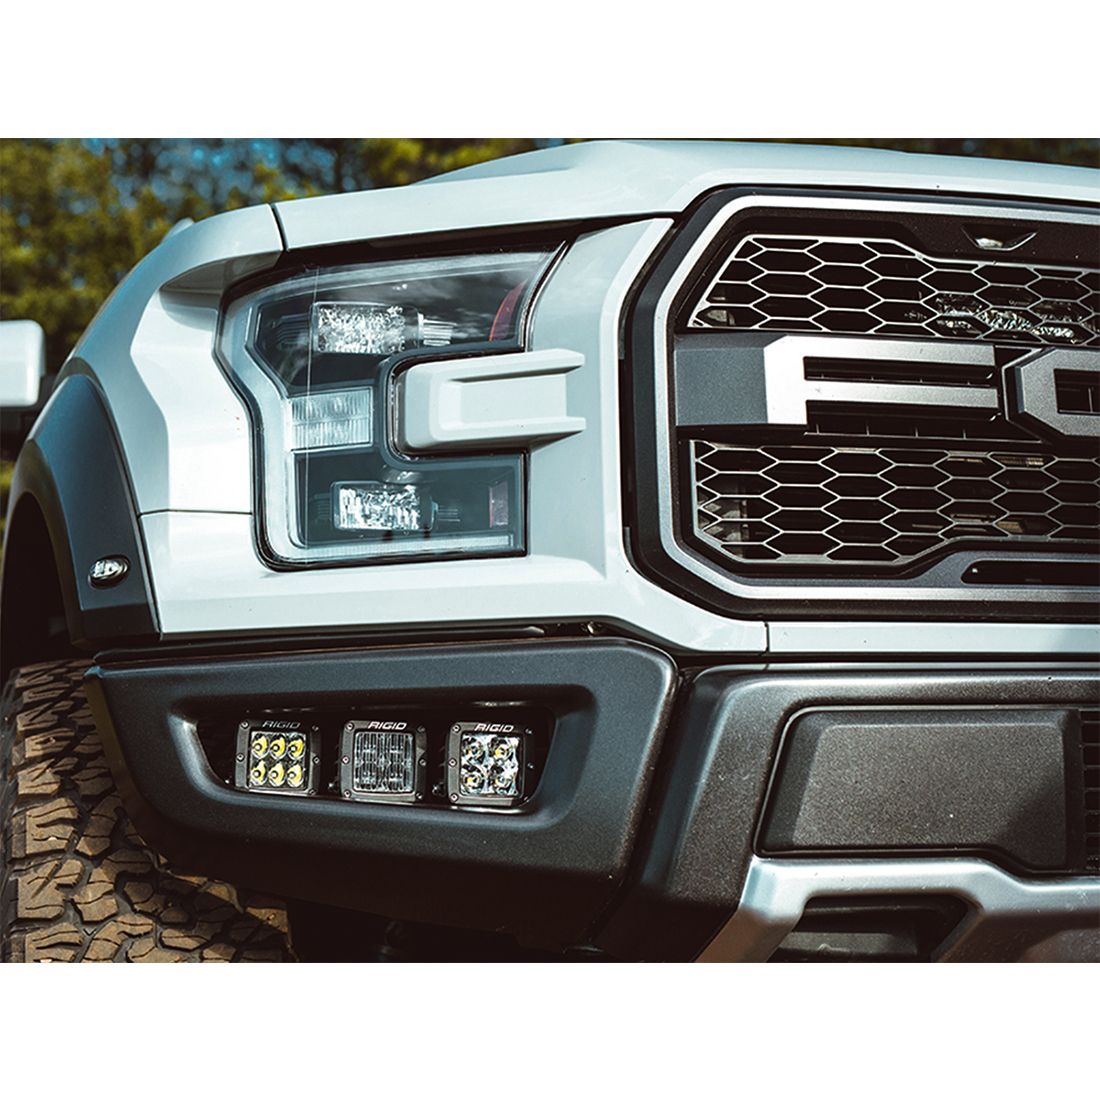 RIGID Industries 17-18 Ford Raptor Fog Light Kit Includes Mounts and 6 D-Series, Application